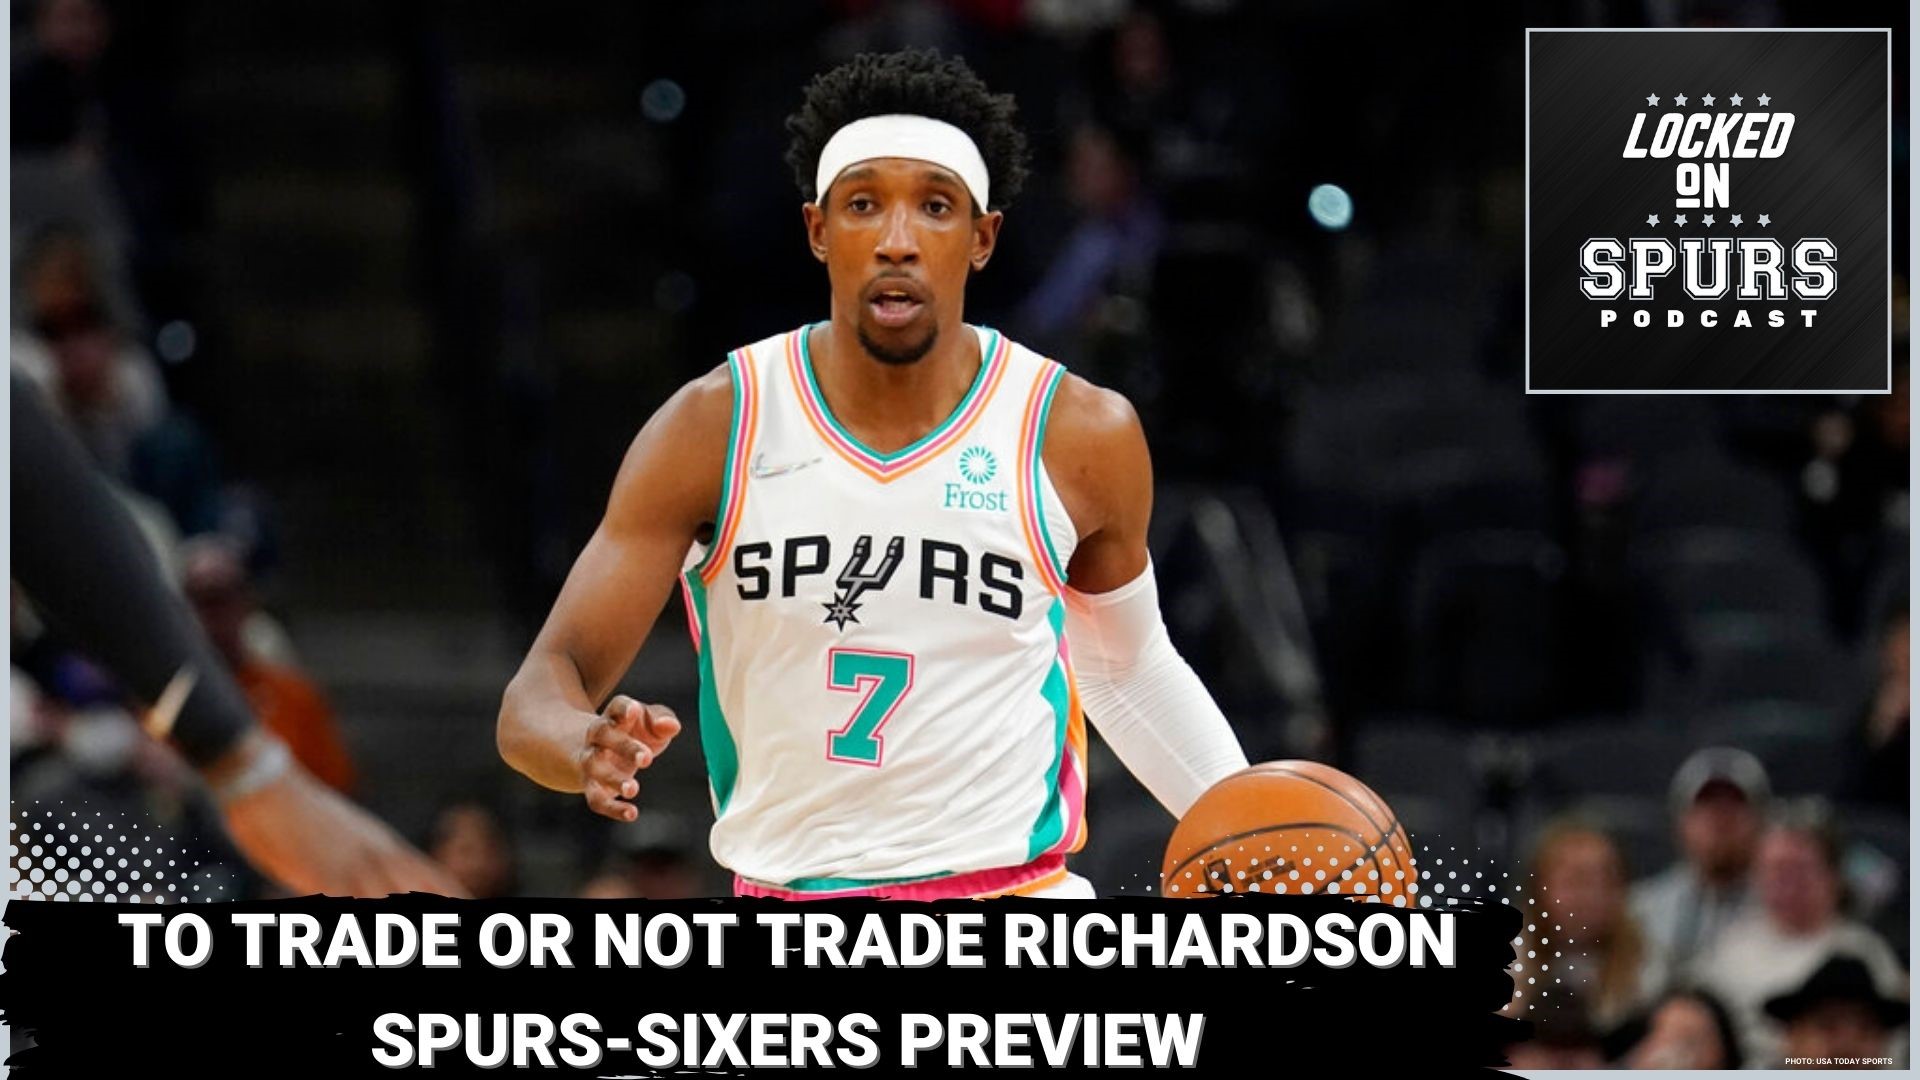 The NBA Trade Deadline is nearing and Richardson could be a trade target.